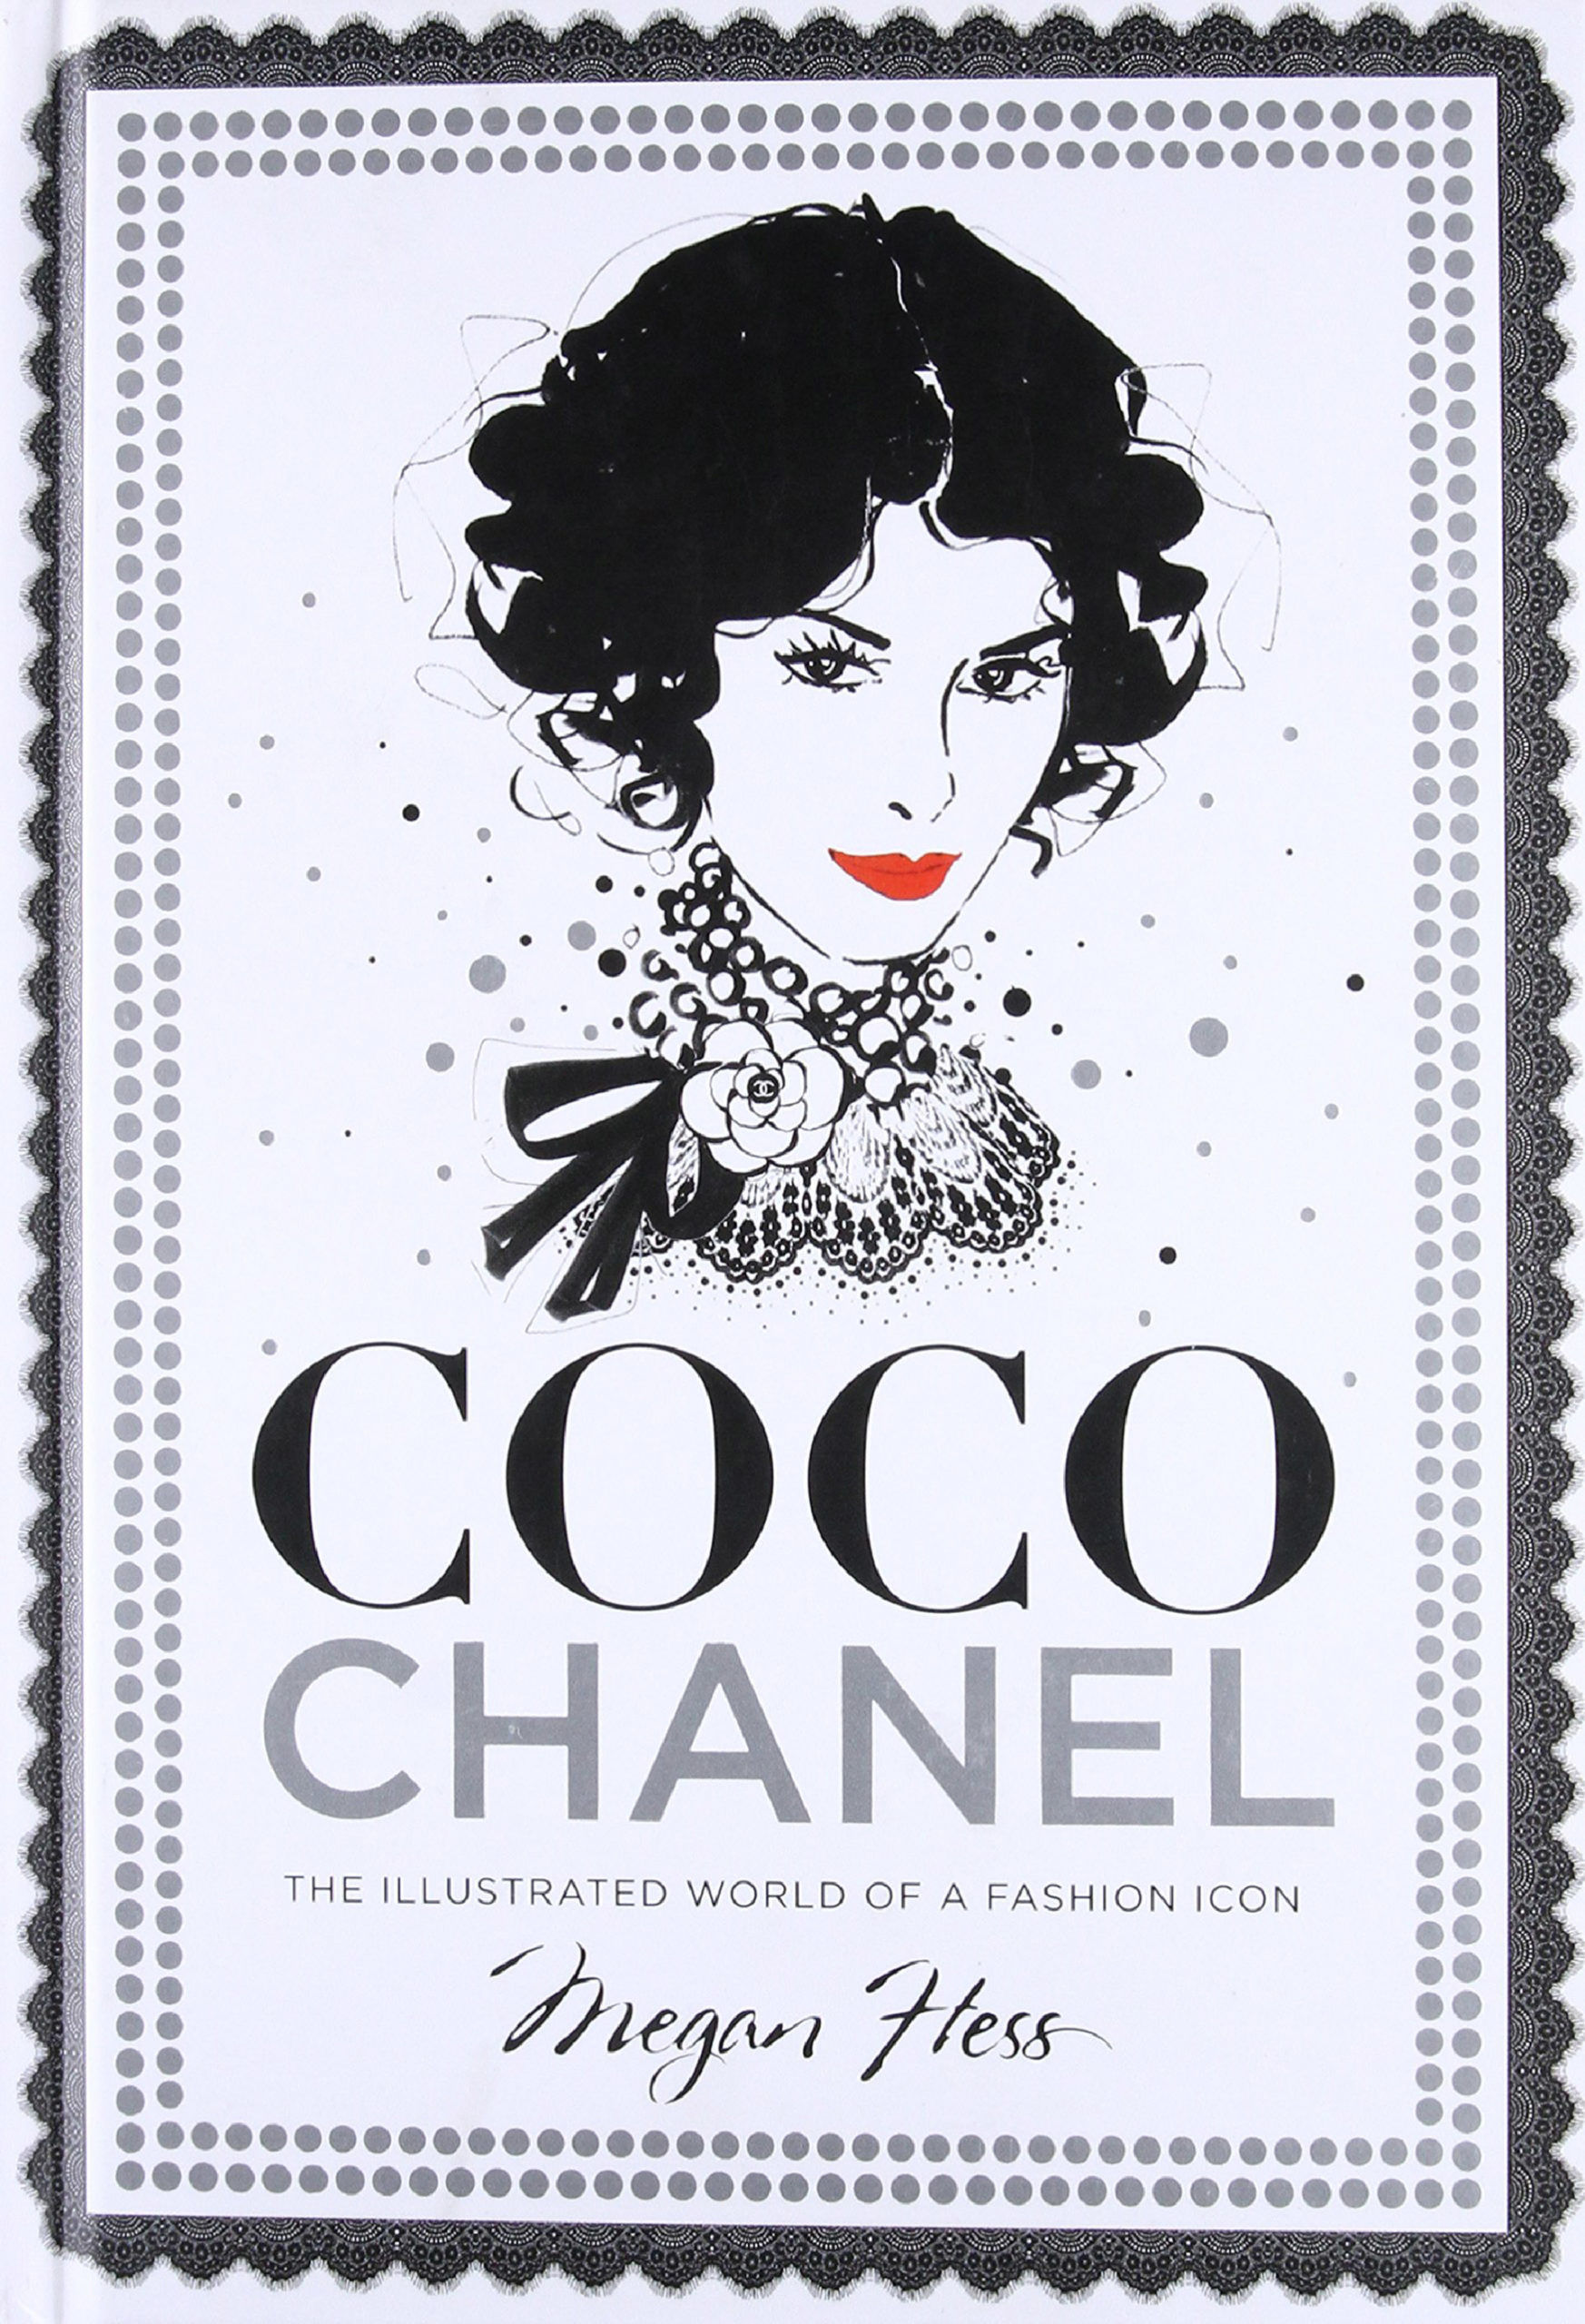 Chanel Takes London with Big V&A Exhibition about the Designer's Life – WWD